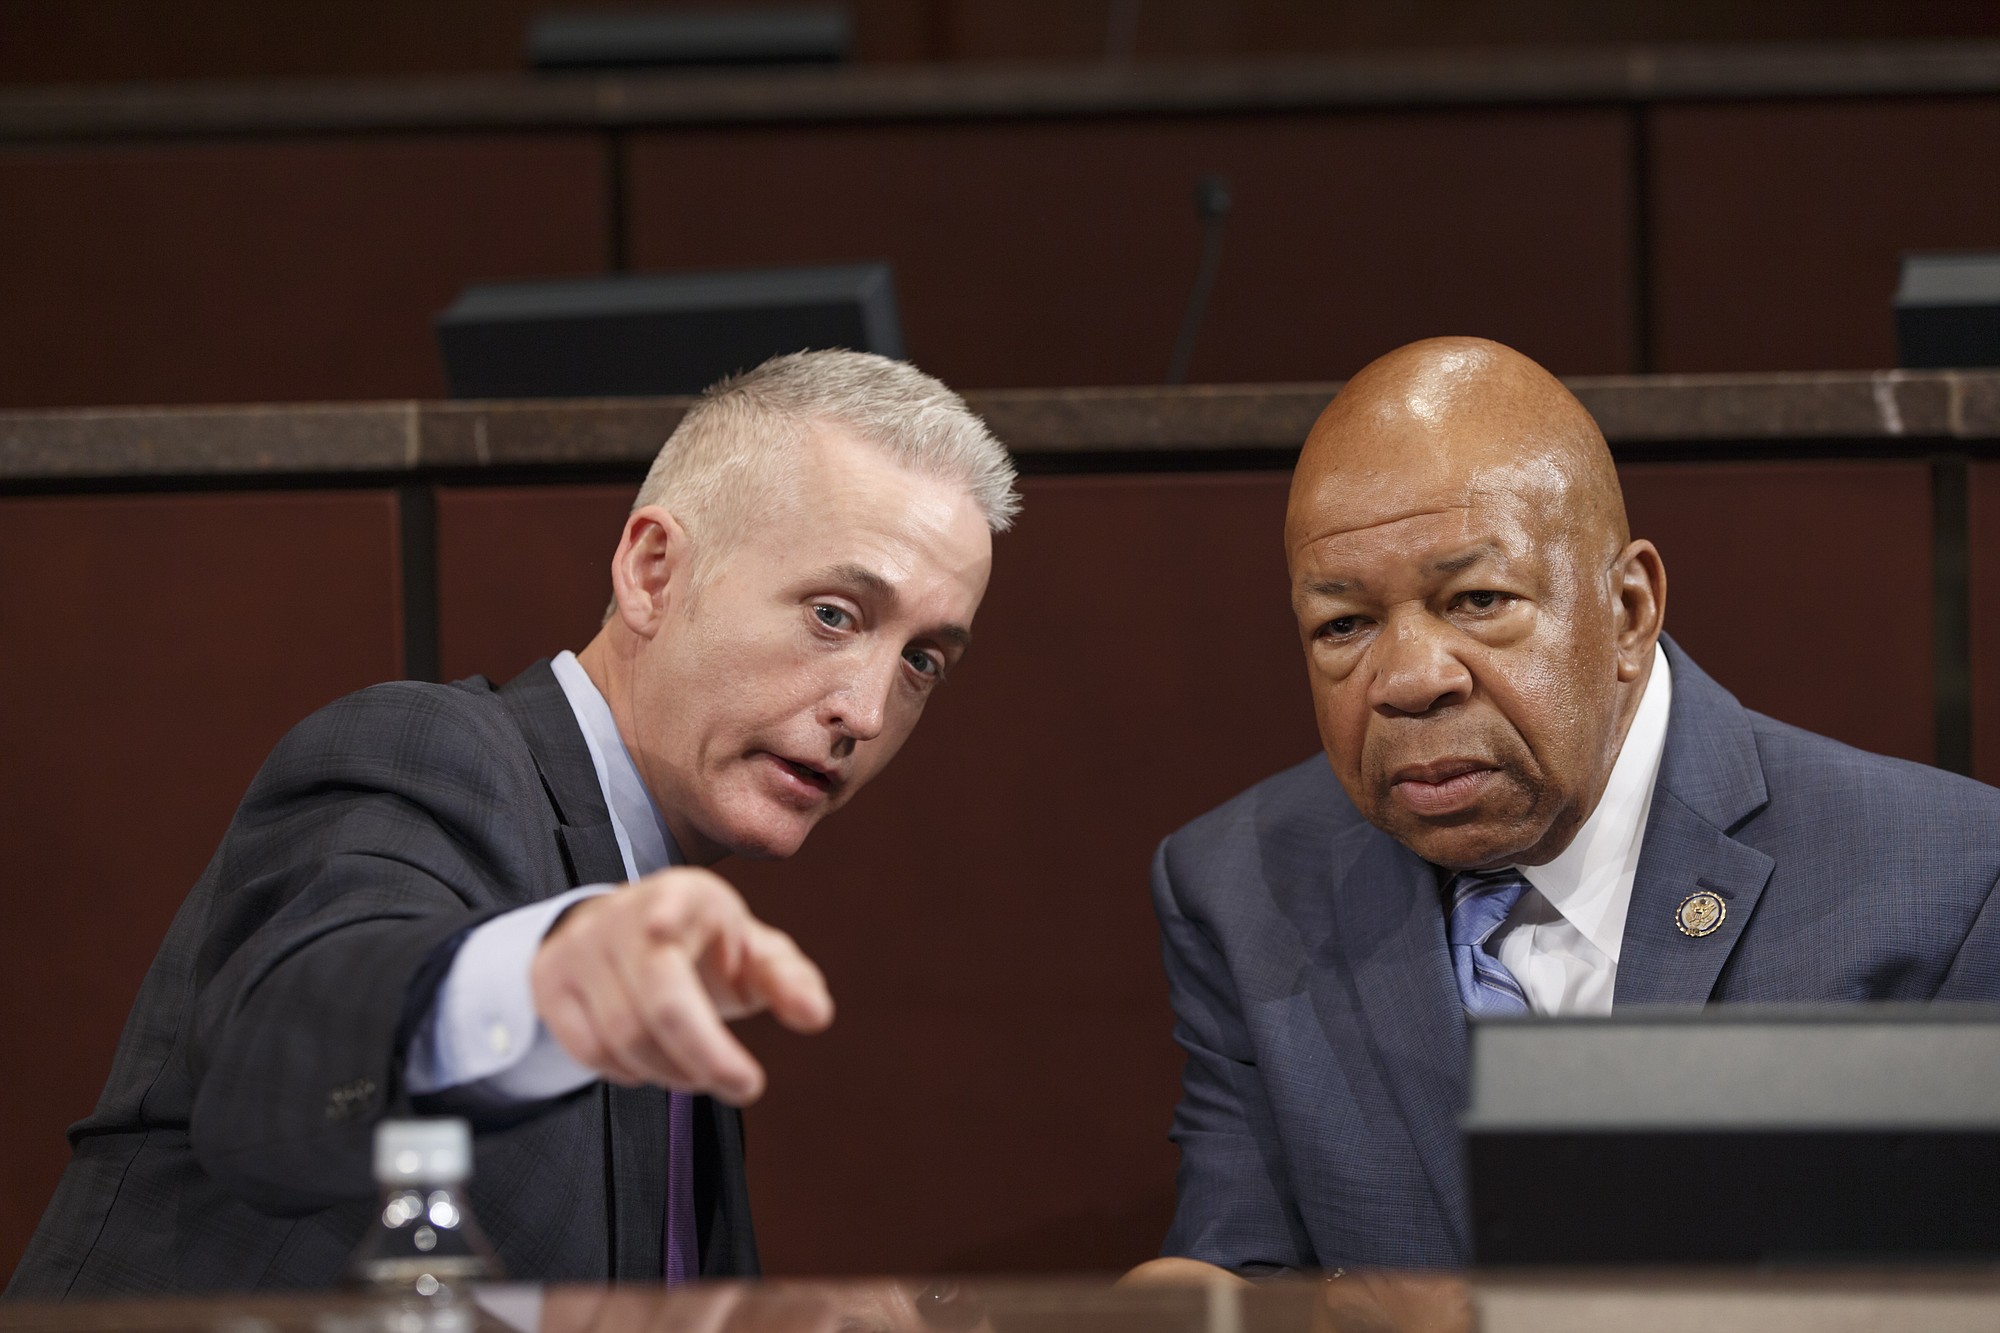 Rep. Trey Gowdy, R-S.C., chairman of the House Select Committee on Benghazi, and Rep. Elijah Cummings, D-Md., right, the ranking member, confer in September as the panel holds its first public hearing to investigate the 2012 attacks on the U.S.